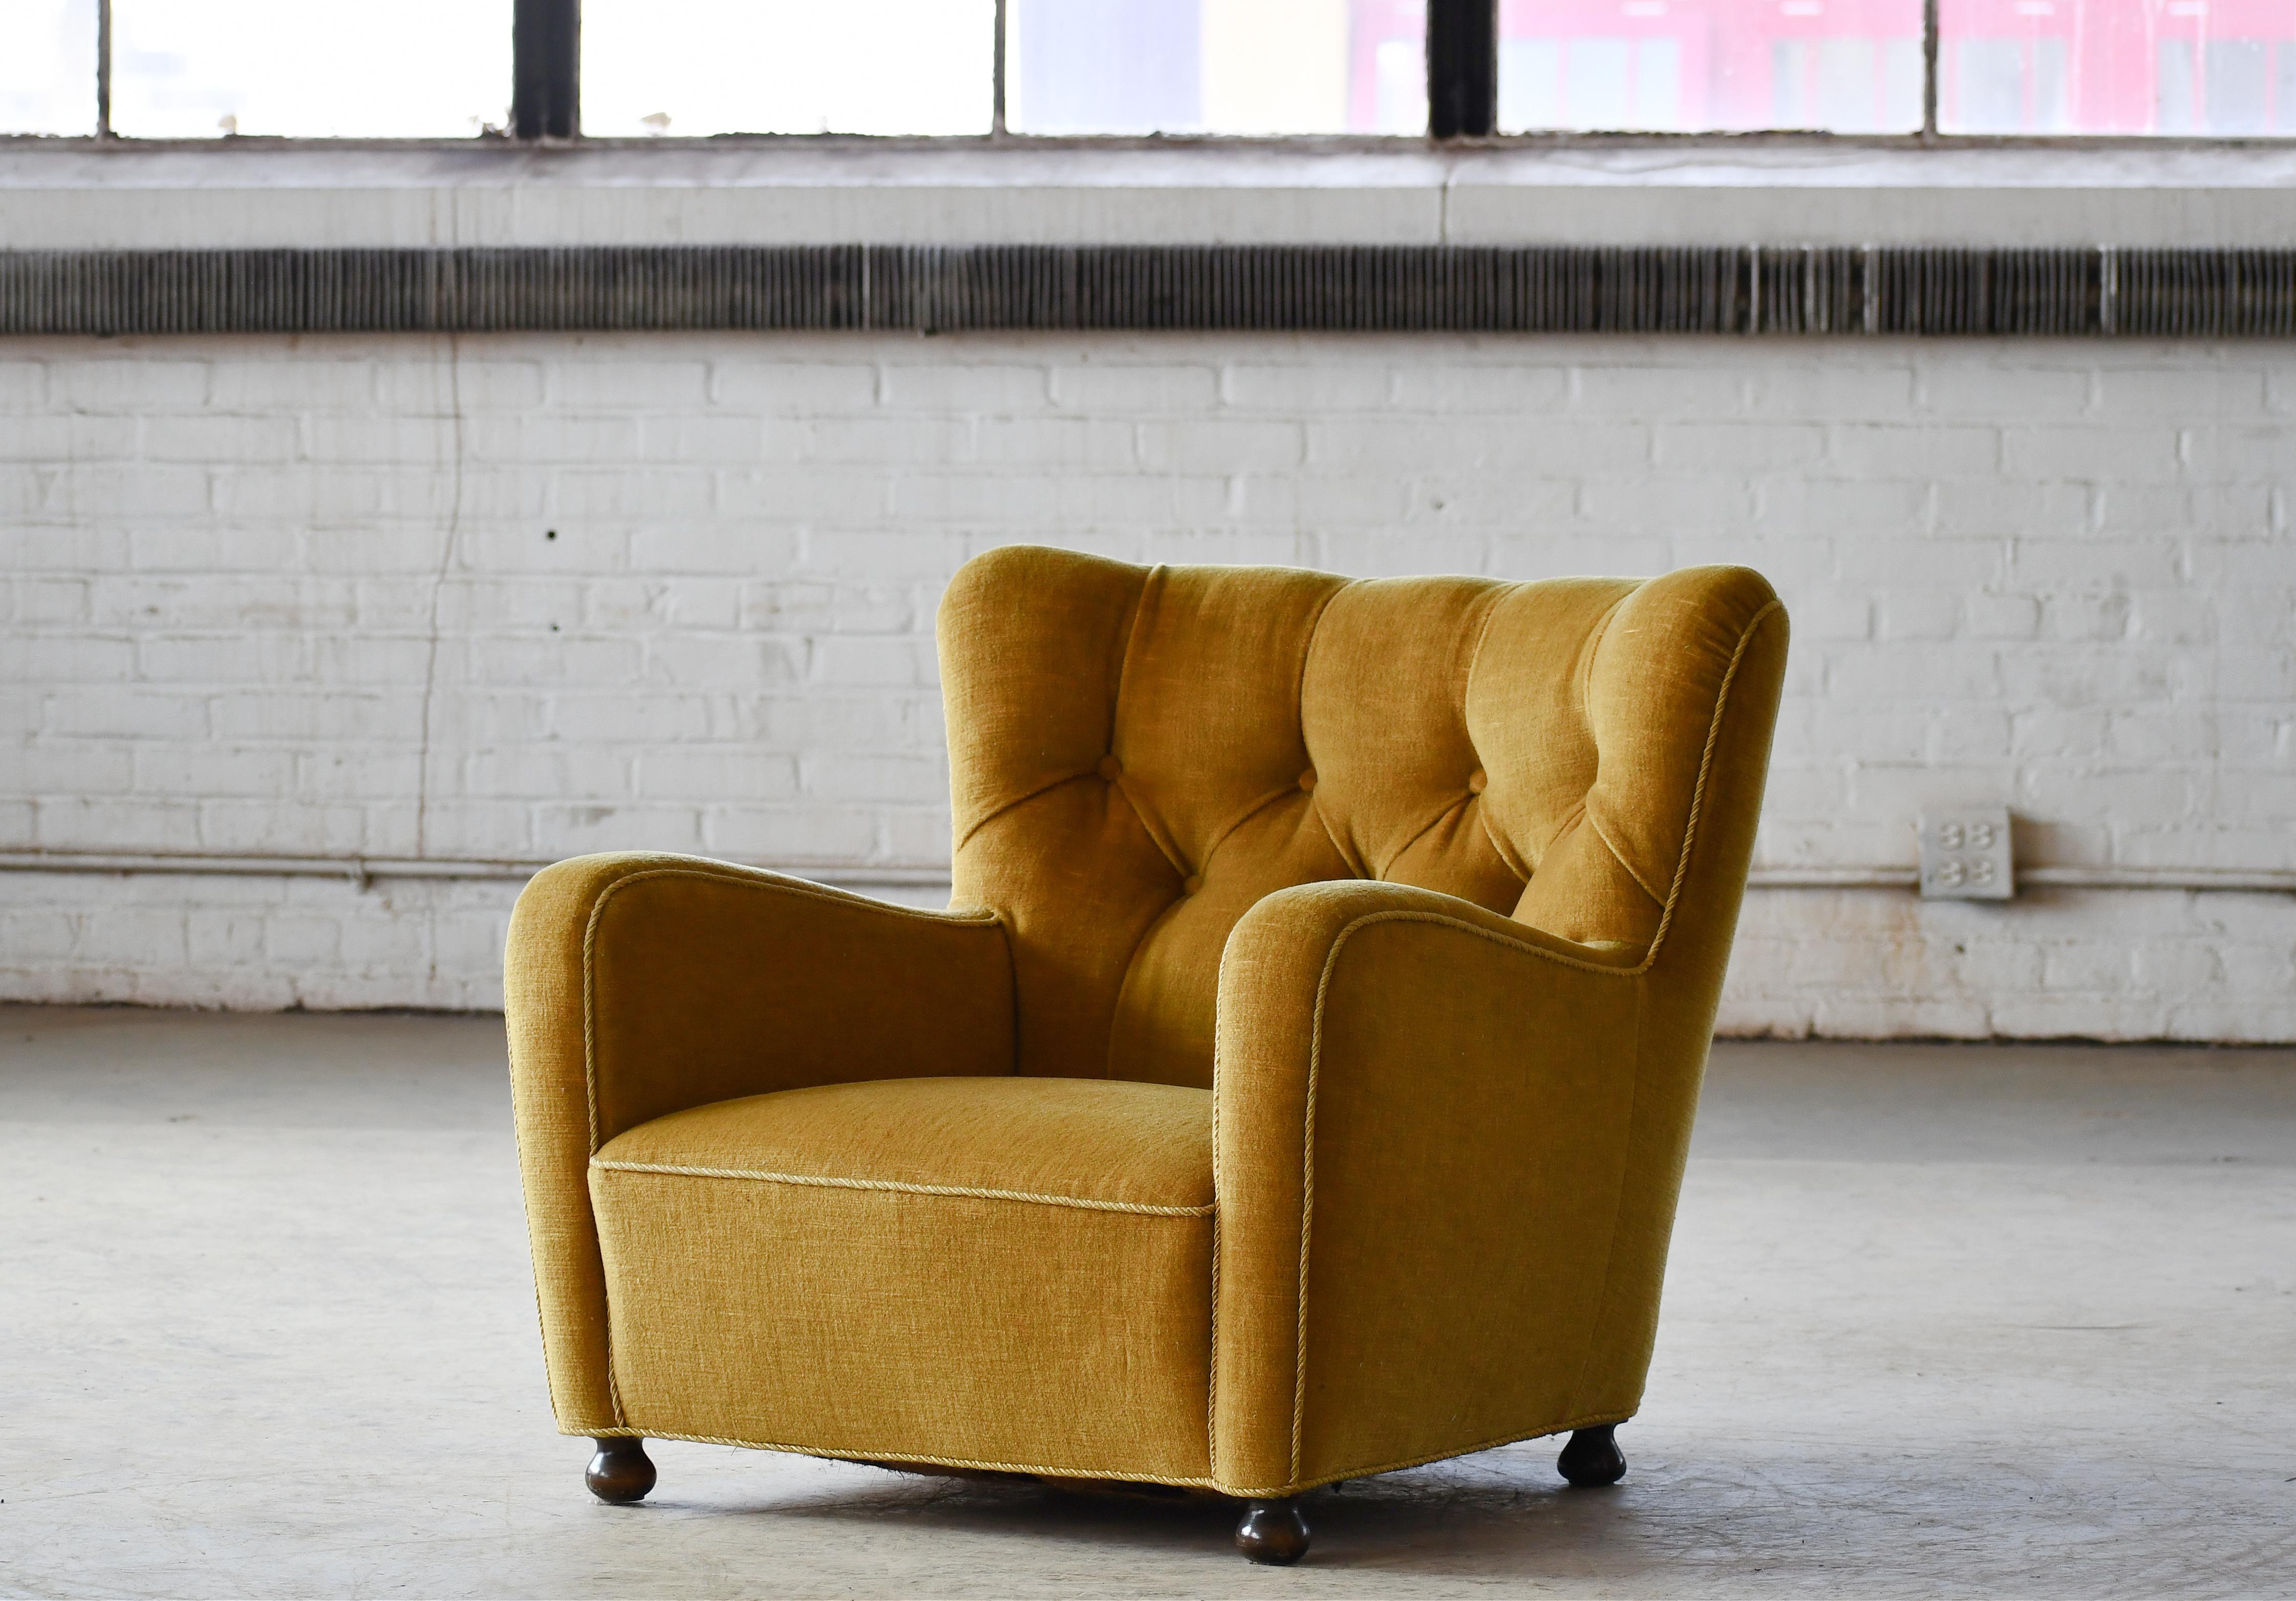 Mid-Century Modern 1930-40s Danish Art Deco or Early Midcentury Lounge Chair in Golden Mohair